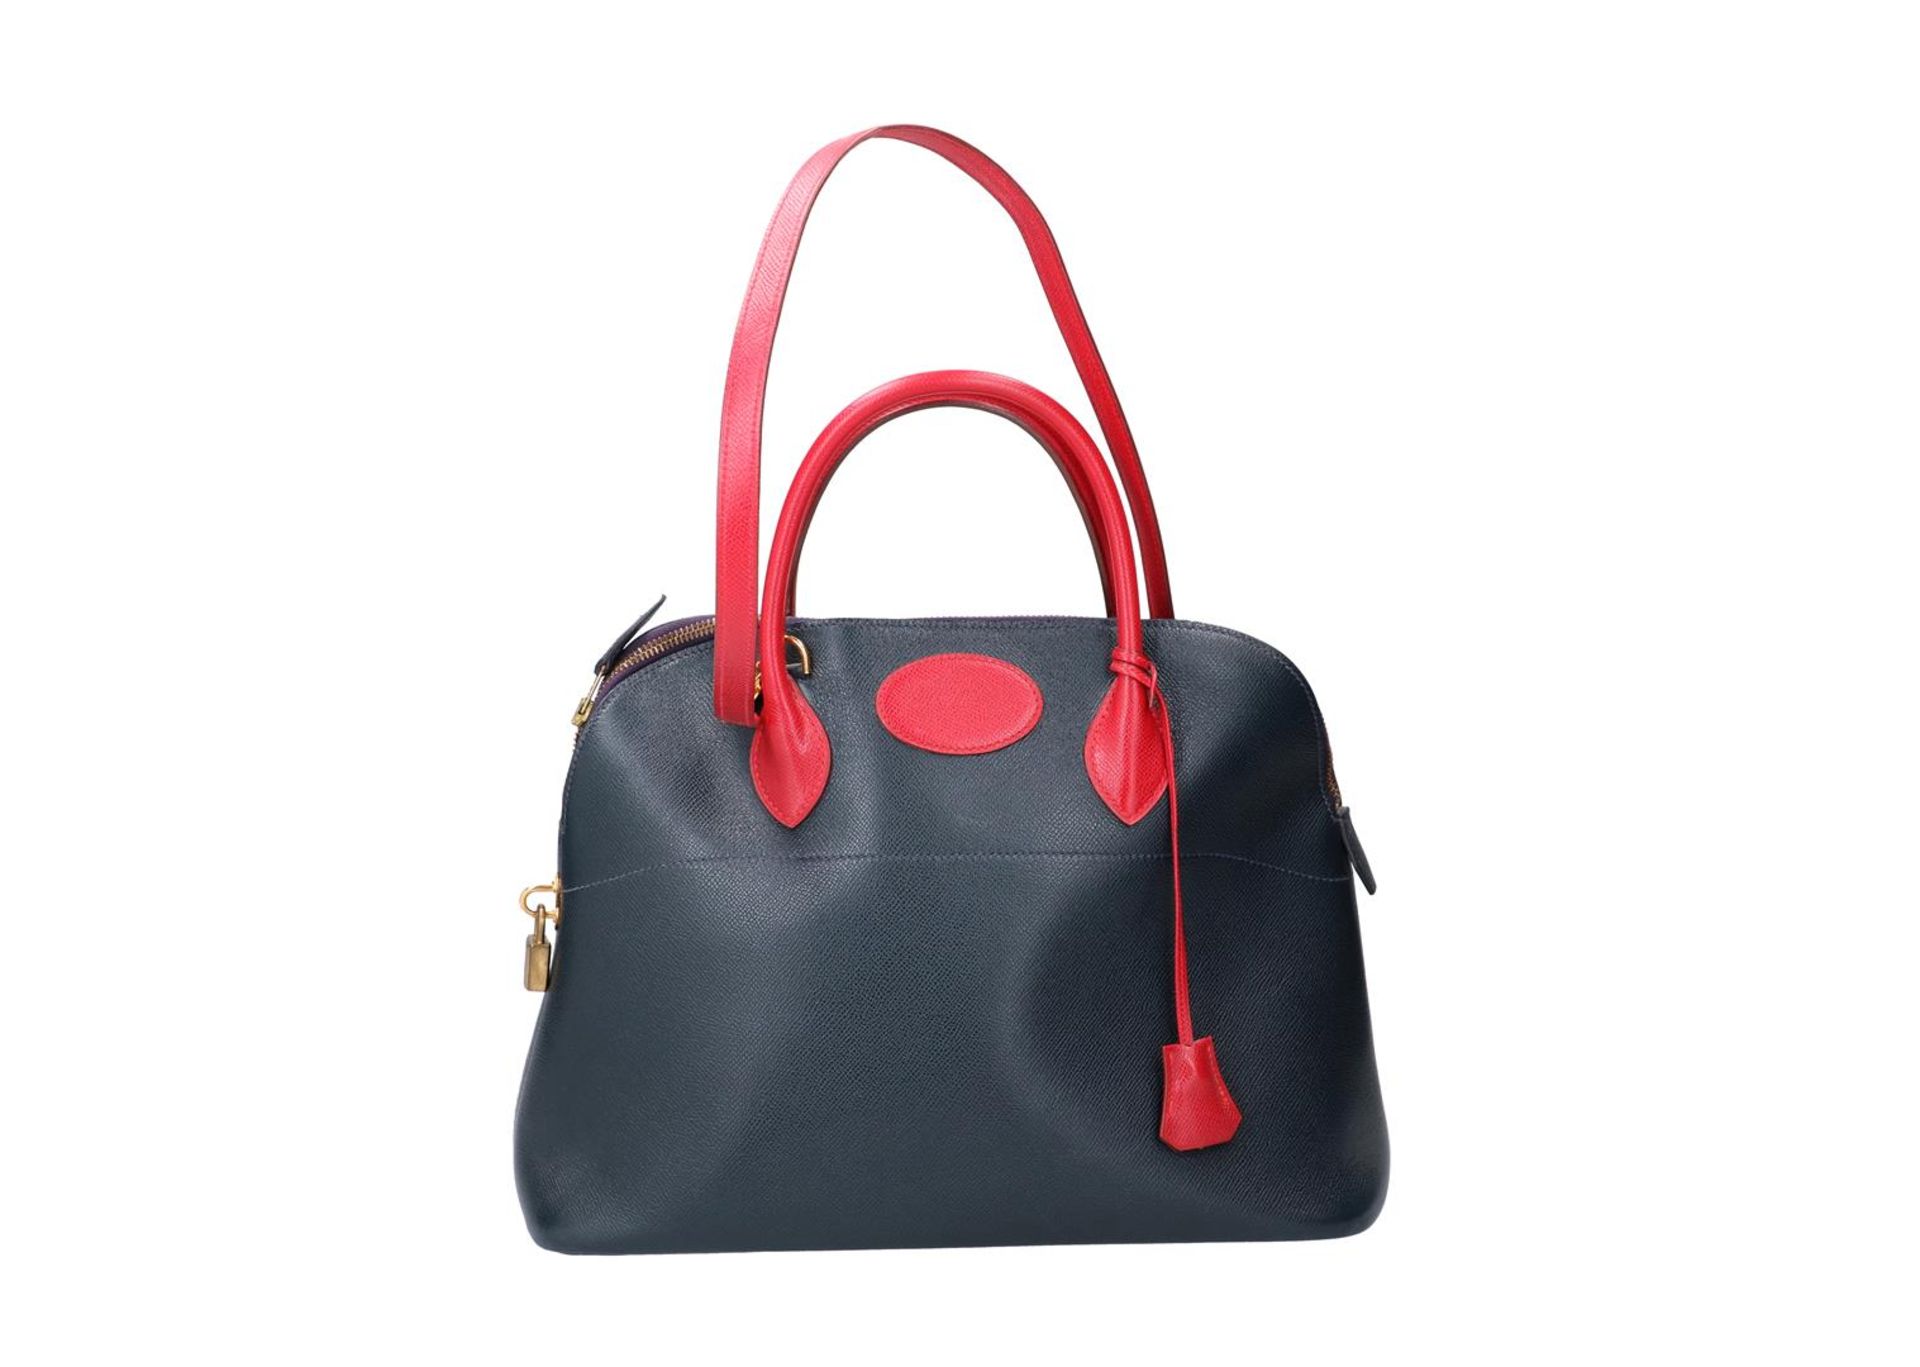 Hermes, navy blue and red handbag, 'Bolide', with lock and two keys. H x W x D: 28 x 34 x 14 cm. - Image 4 of 5